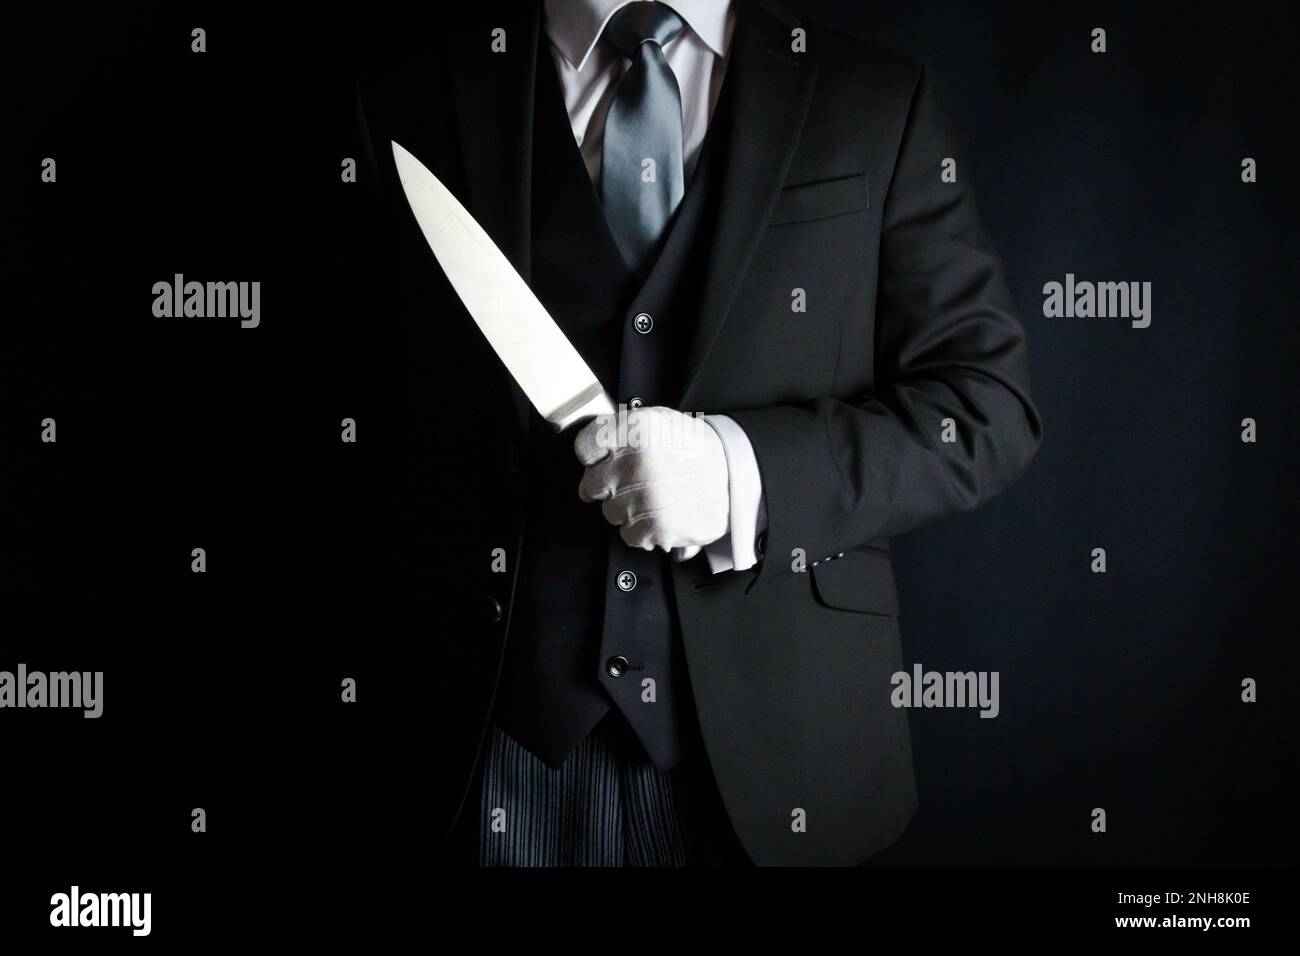 Portrait of Butler in Dark Suit and White Gloves Holding Sharp Knife. Concept of The Butler Did It. Stock Photo